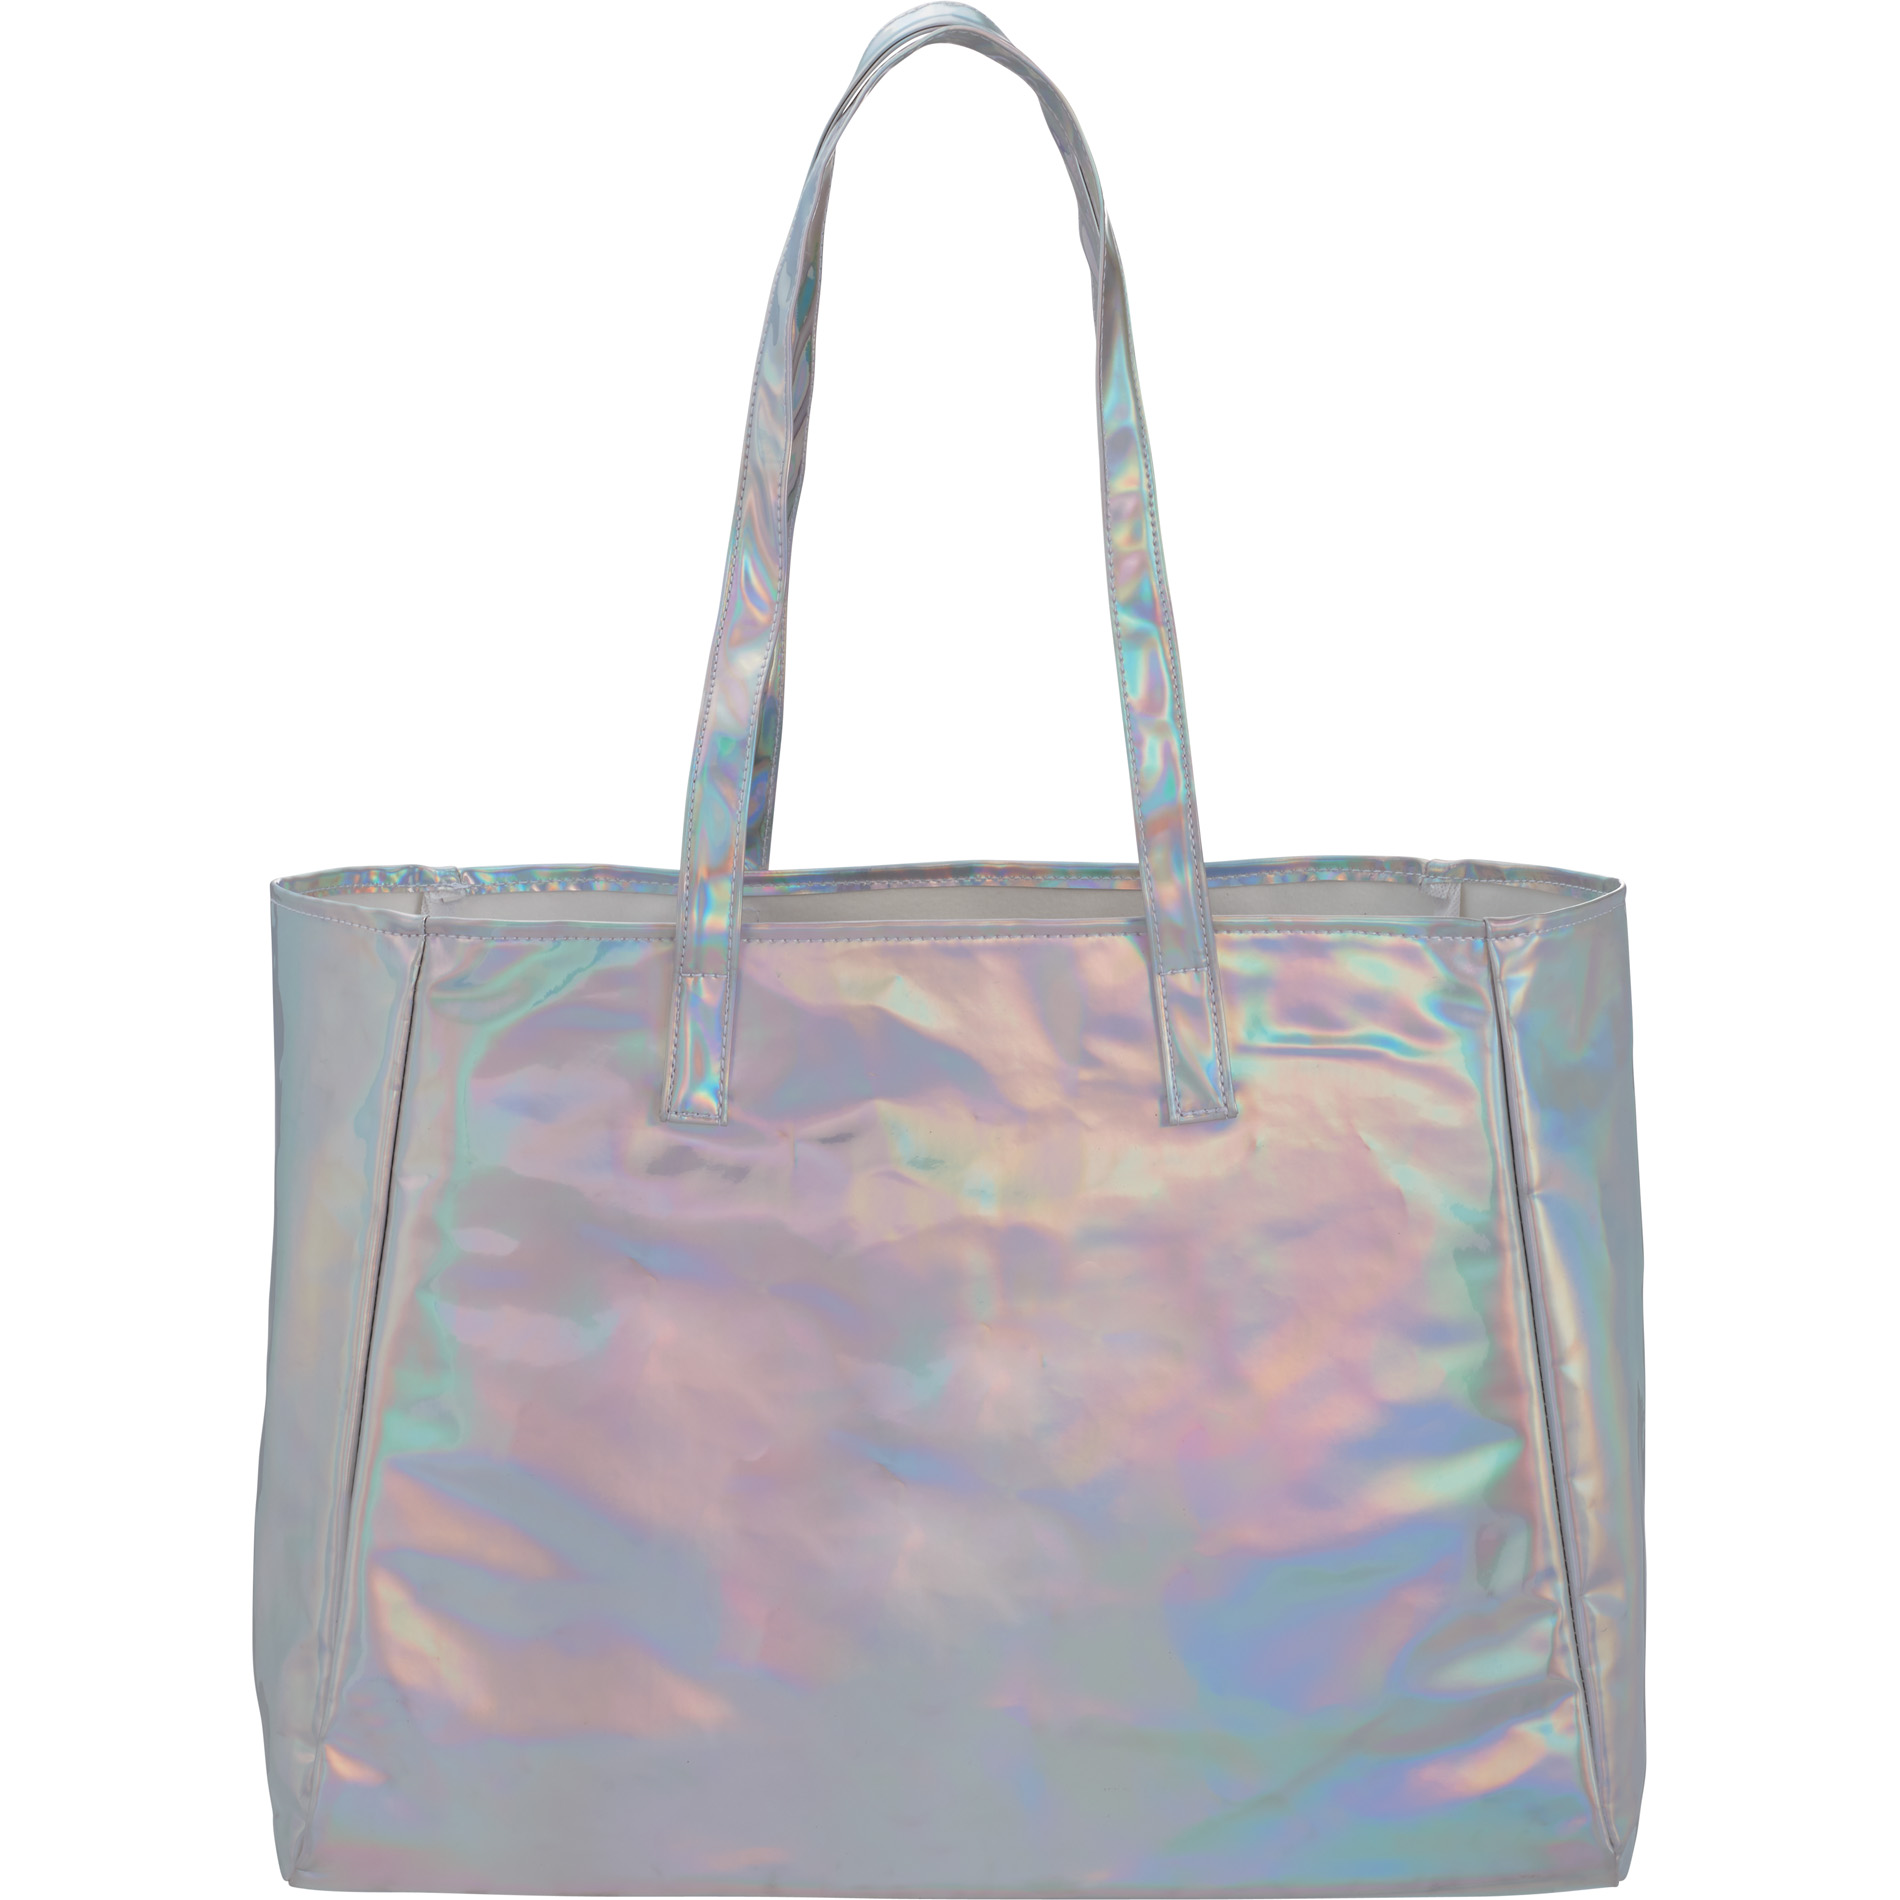 LEEDS 2190-10 - Holographic Shopper Tote